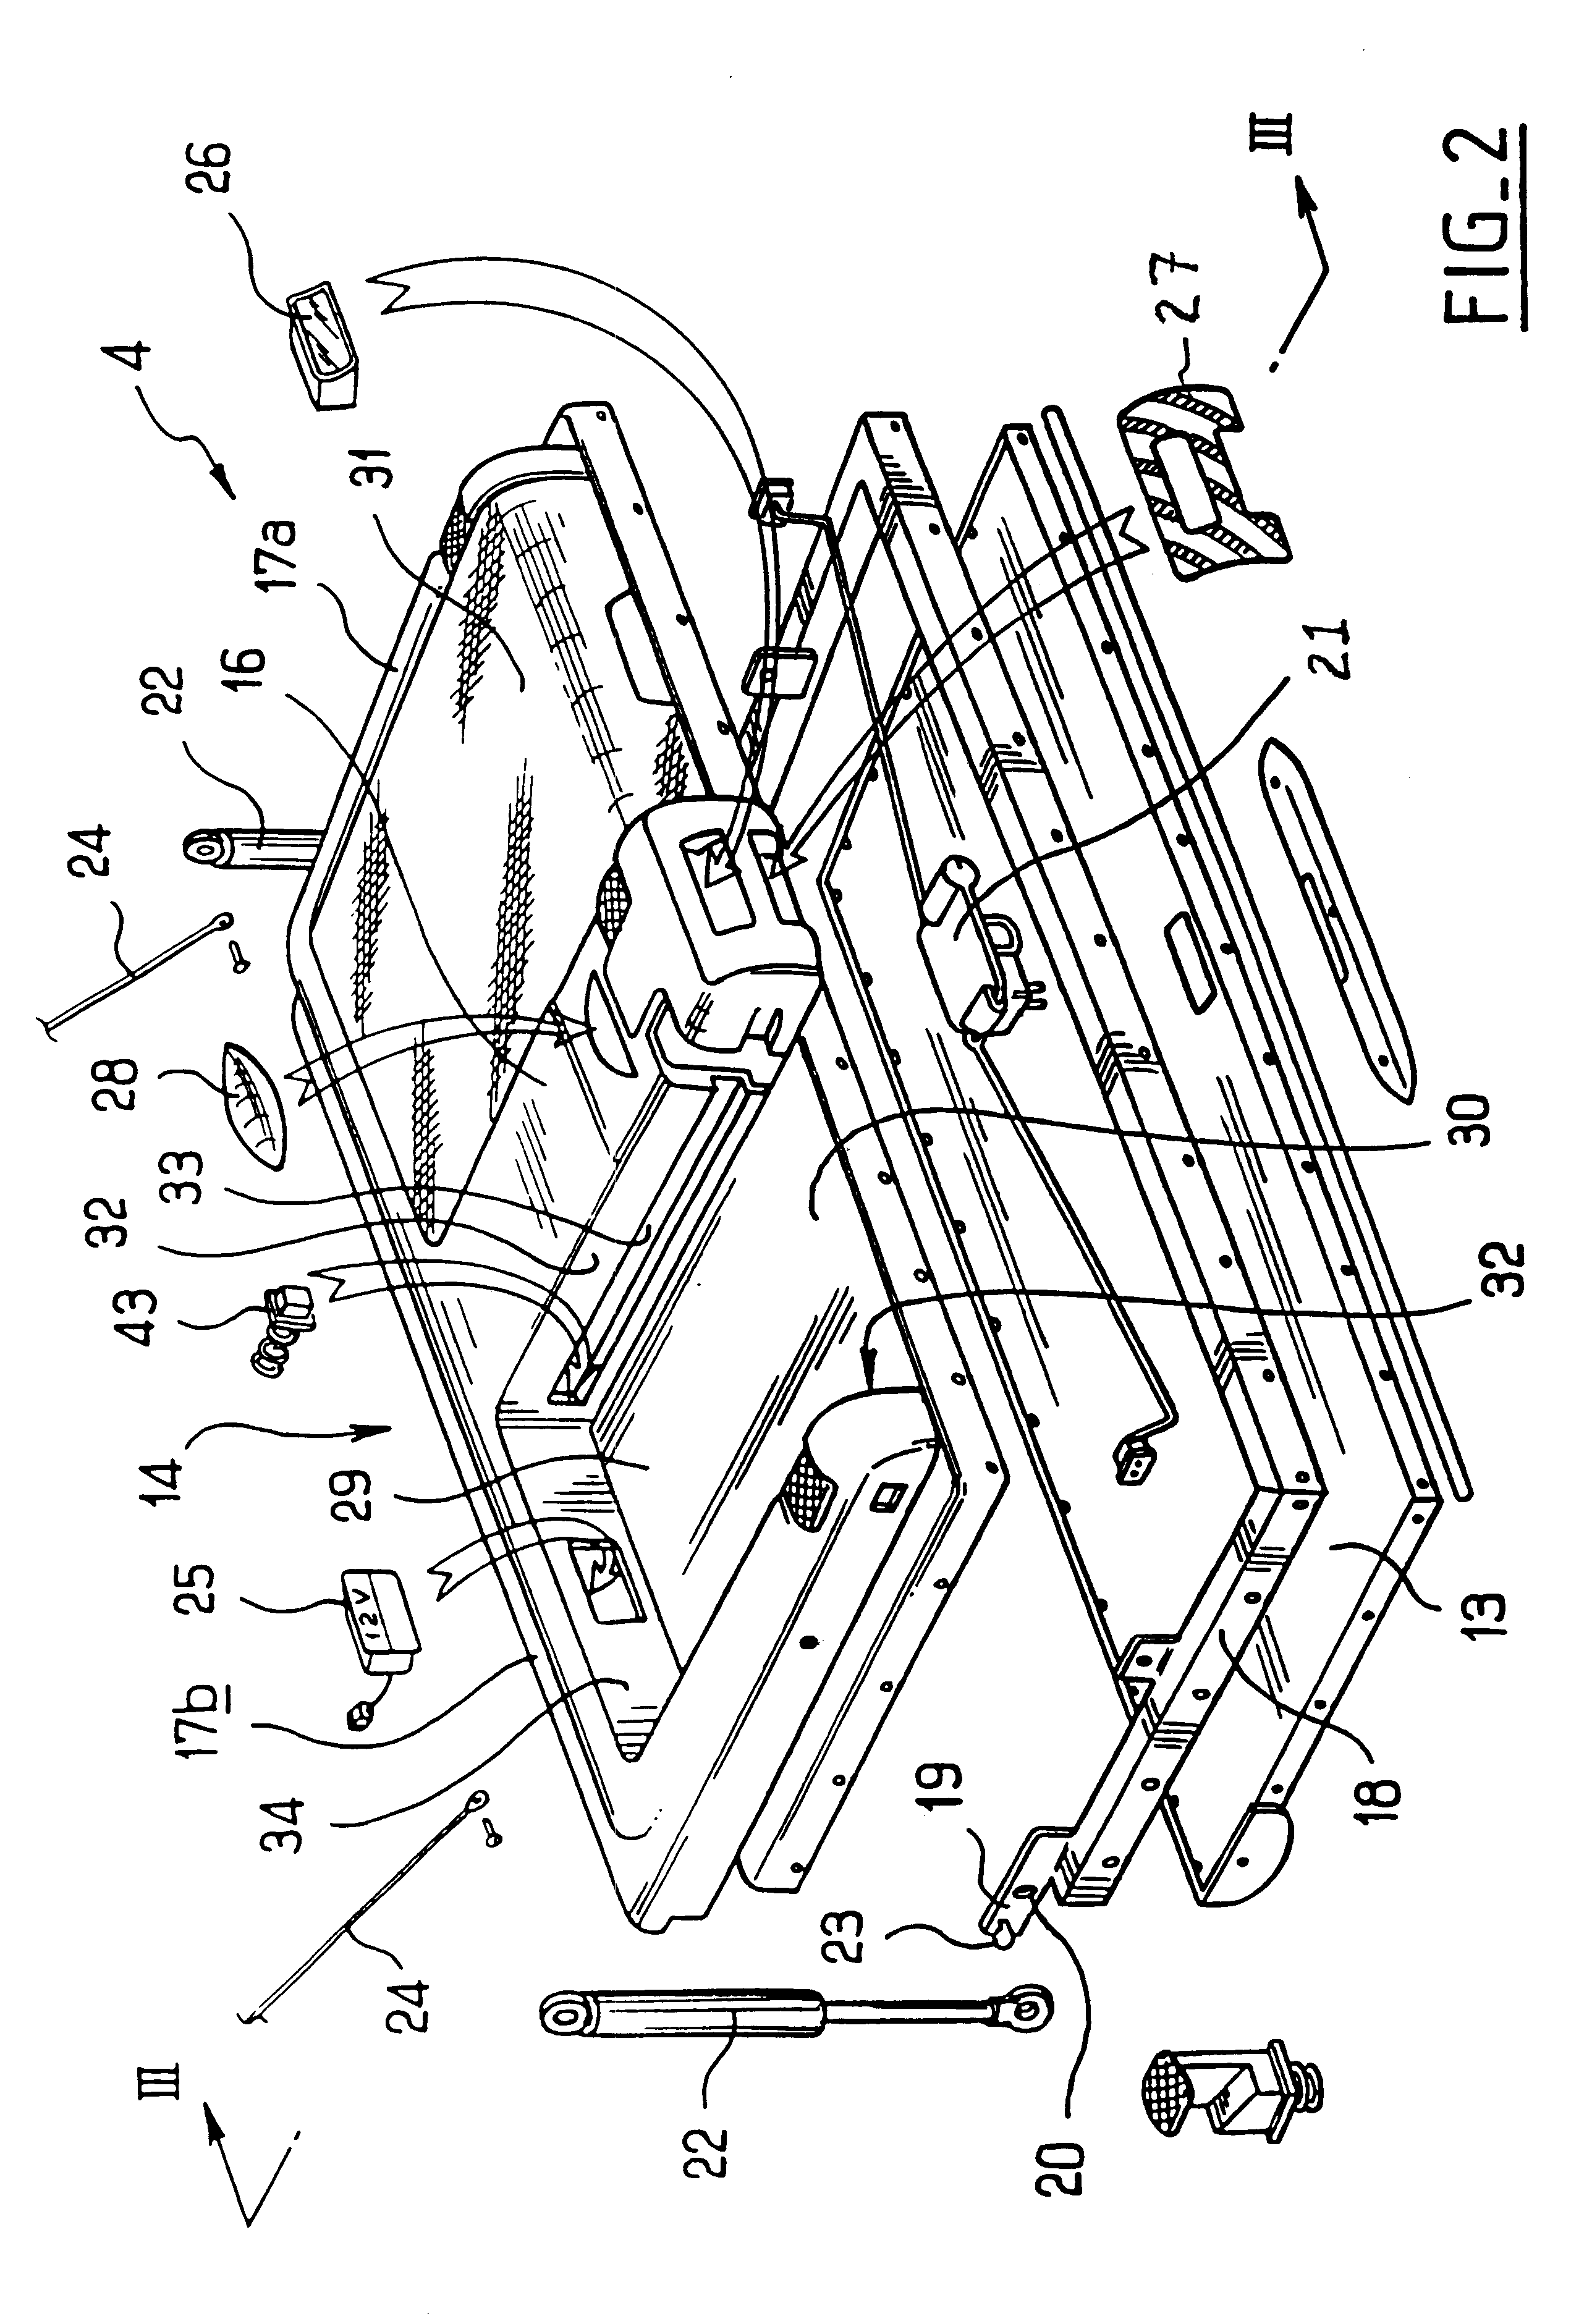 Motor vehicle tailgate mounted to pivot about a horizontal axis in the vicinity of its bottom edge